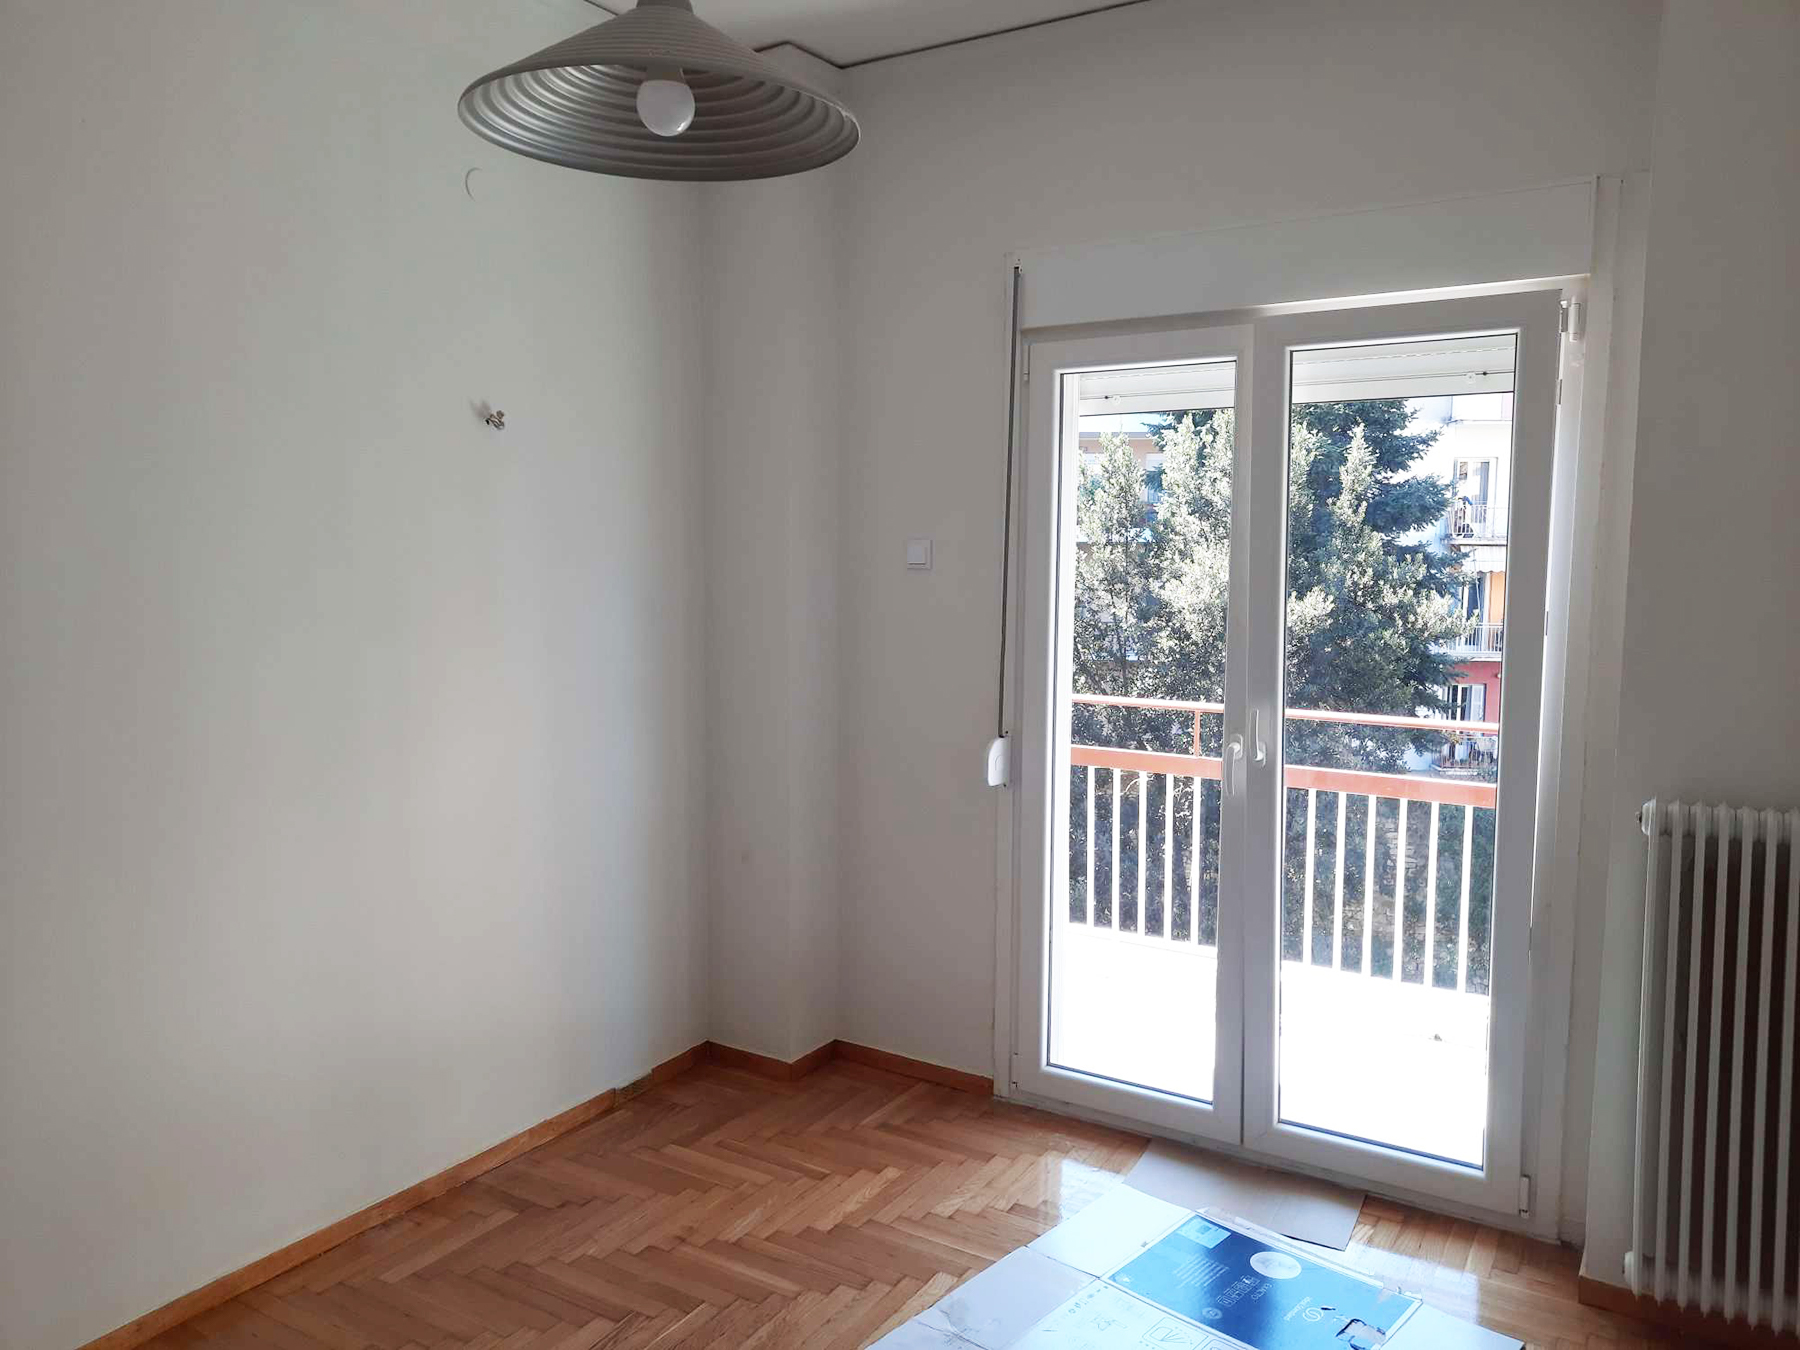 Renovated 1 bedroom apartment for rent, 50 sq.m. 2nd floor in the center of Ioannina near the police.